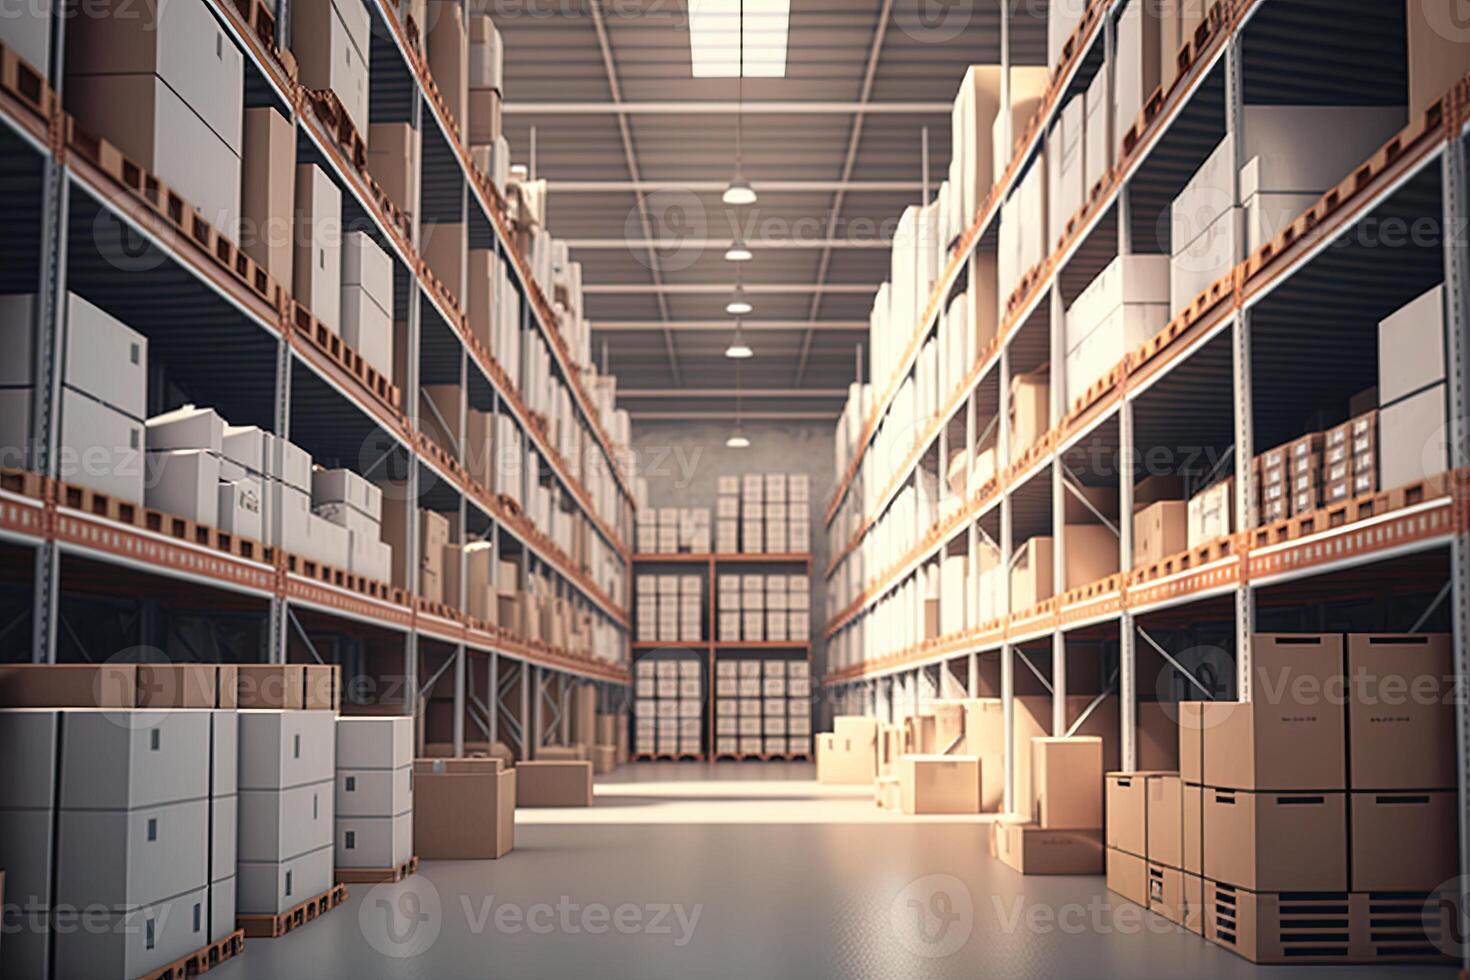 https://static.vecteezy.com/system/resources/previews/023/486/509/non_2x/a-large-clean-warehouse-with-shelfs-carboard-boxes-and-products-generative-ai-interior-of-a-industrial-warehouse-with-many-shelves-with-yellow-and-white-box-packing-photo.jpg